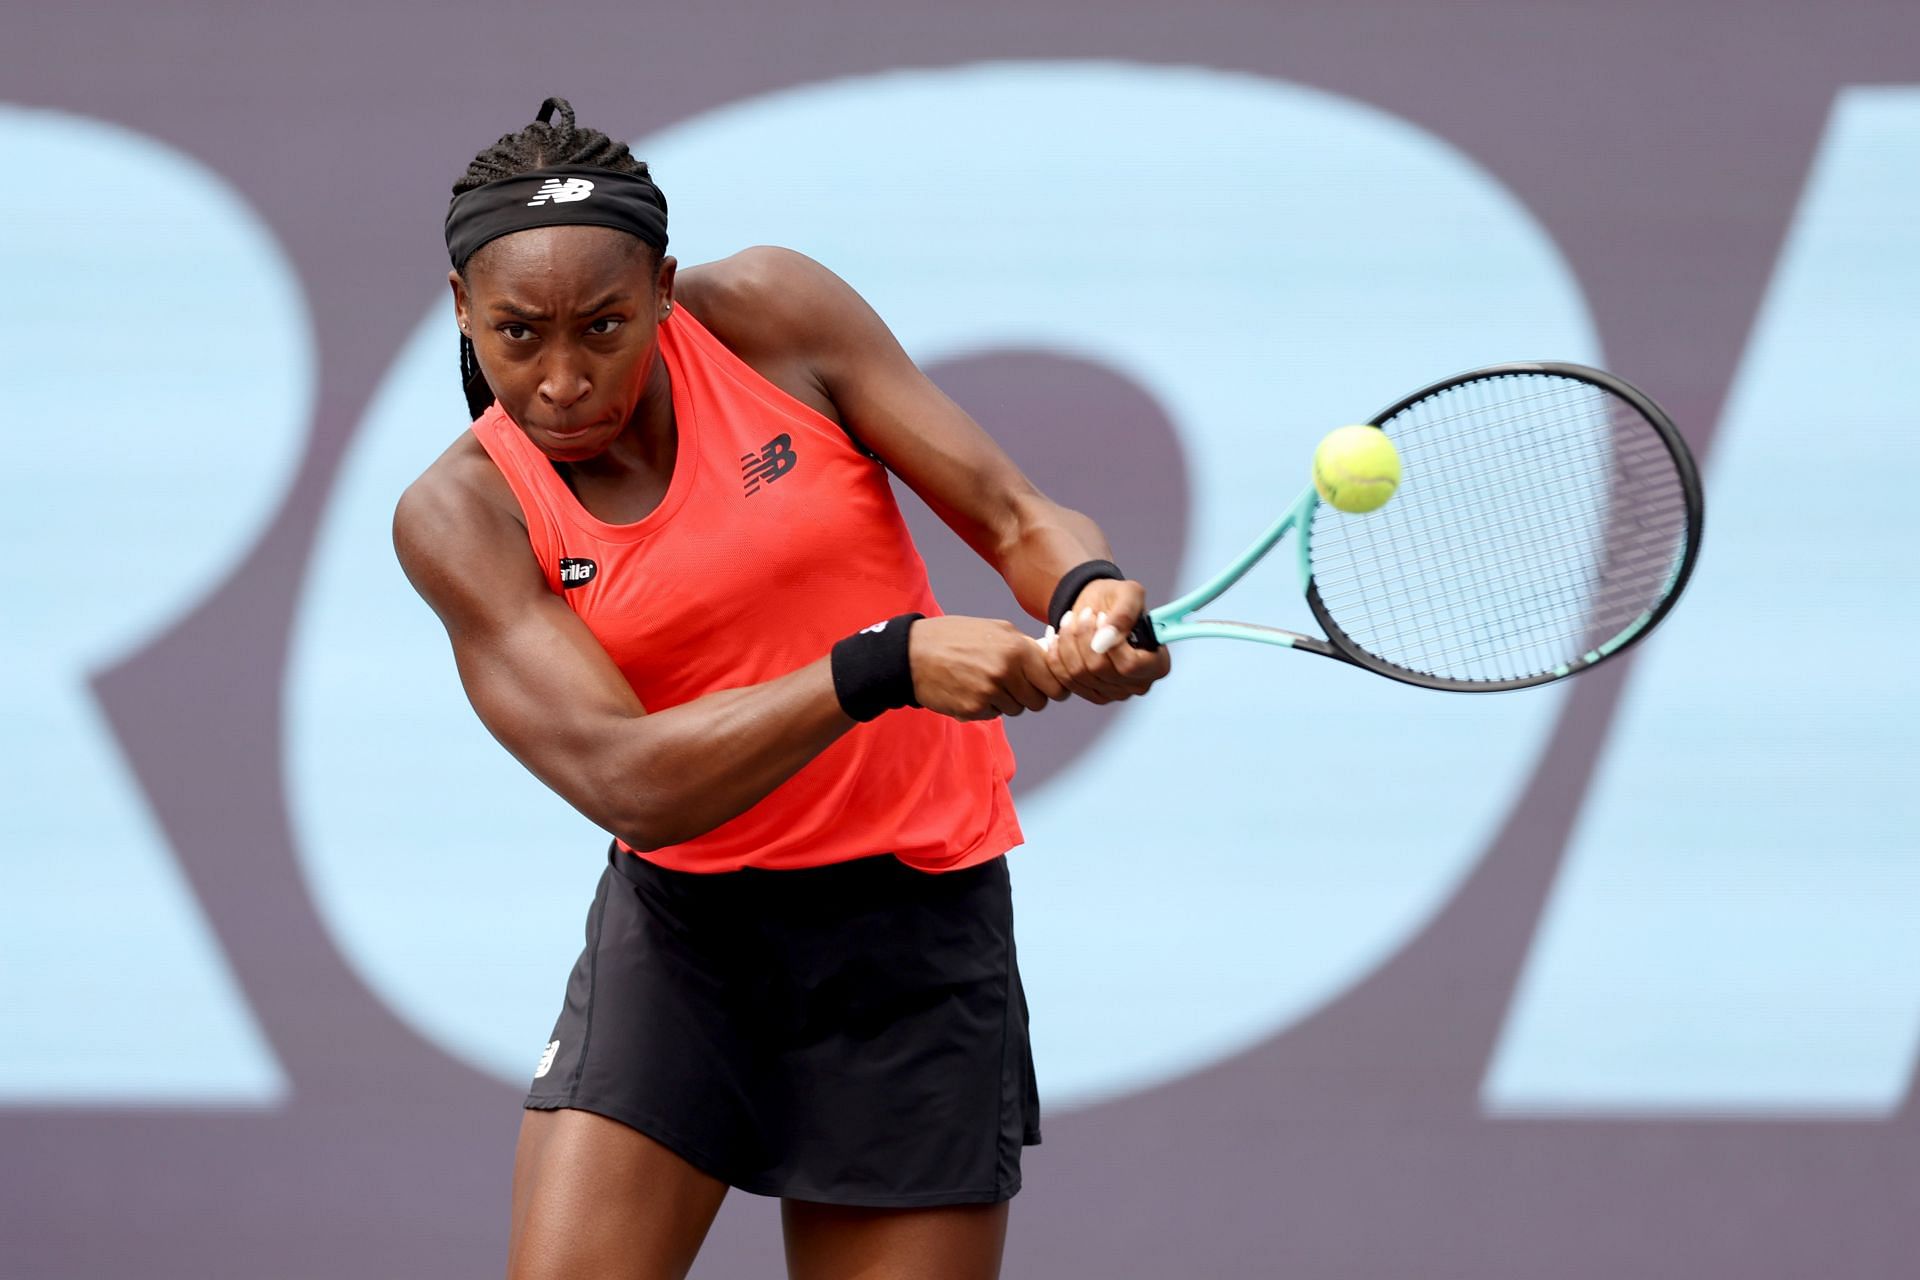 Coco Gauff will make her tournament debut at the 2022 WTA Finals.